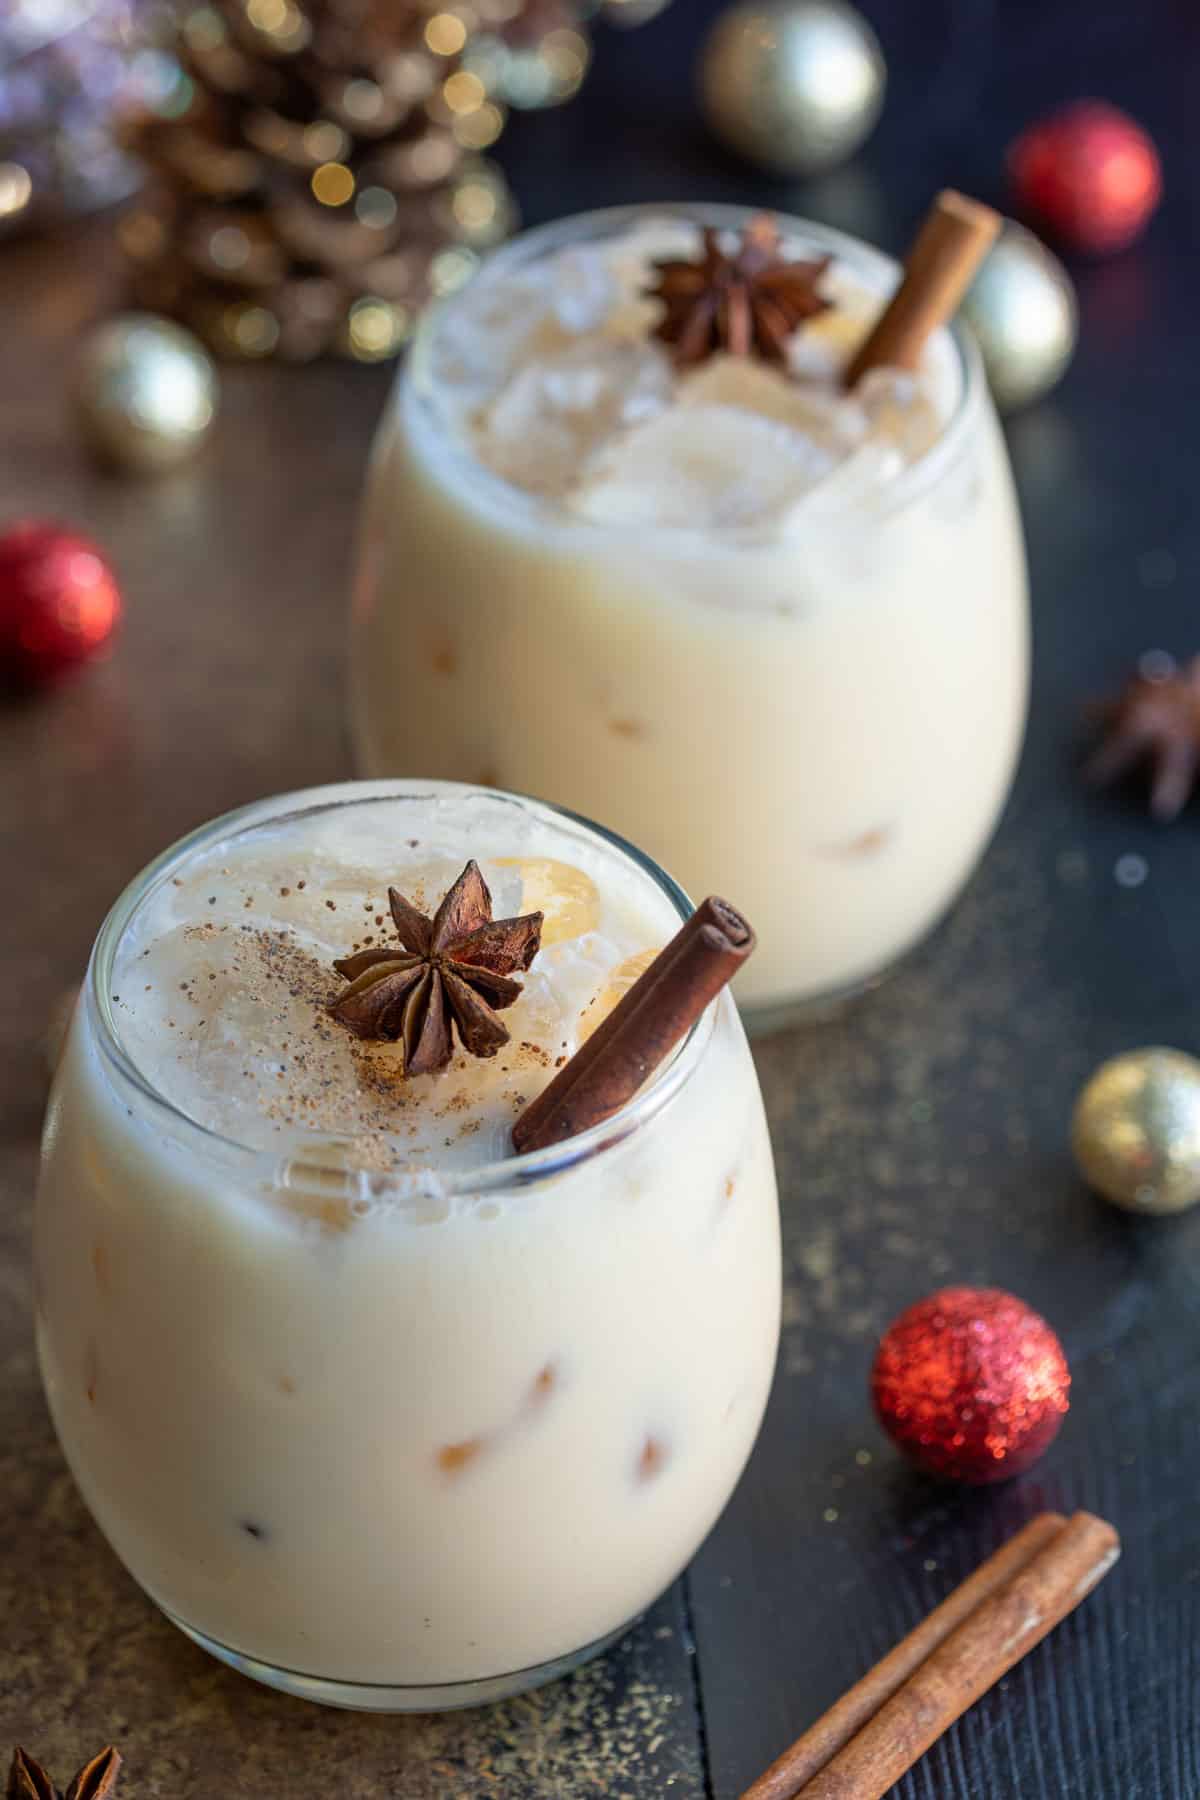 Angled view of two eggnog white Russian cocktails garnished with ground nutmeg, star anise, and a cinnamon stick.